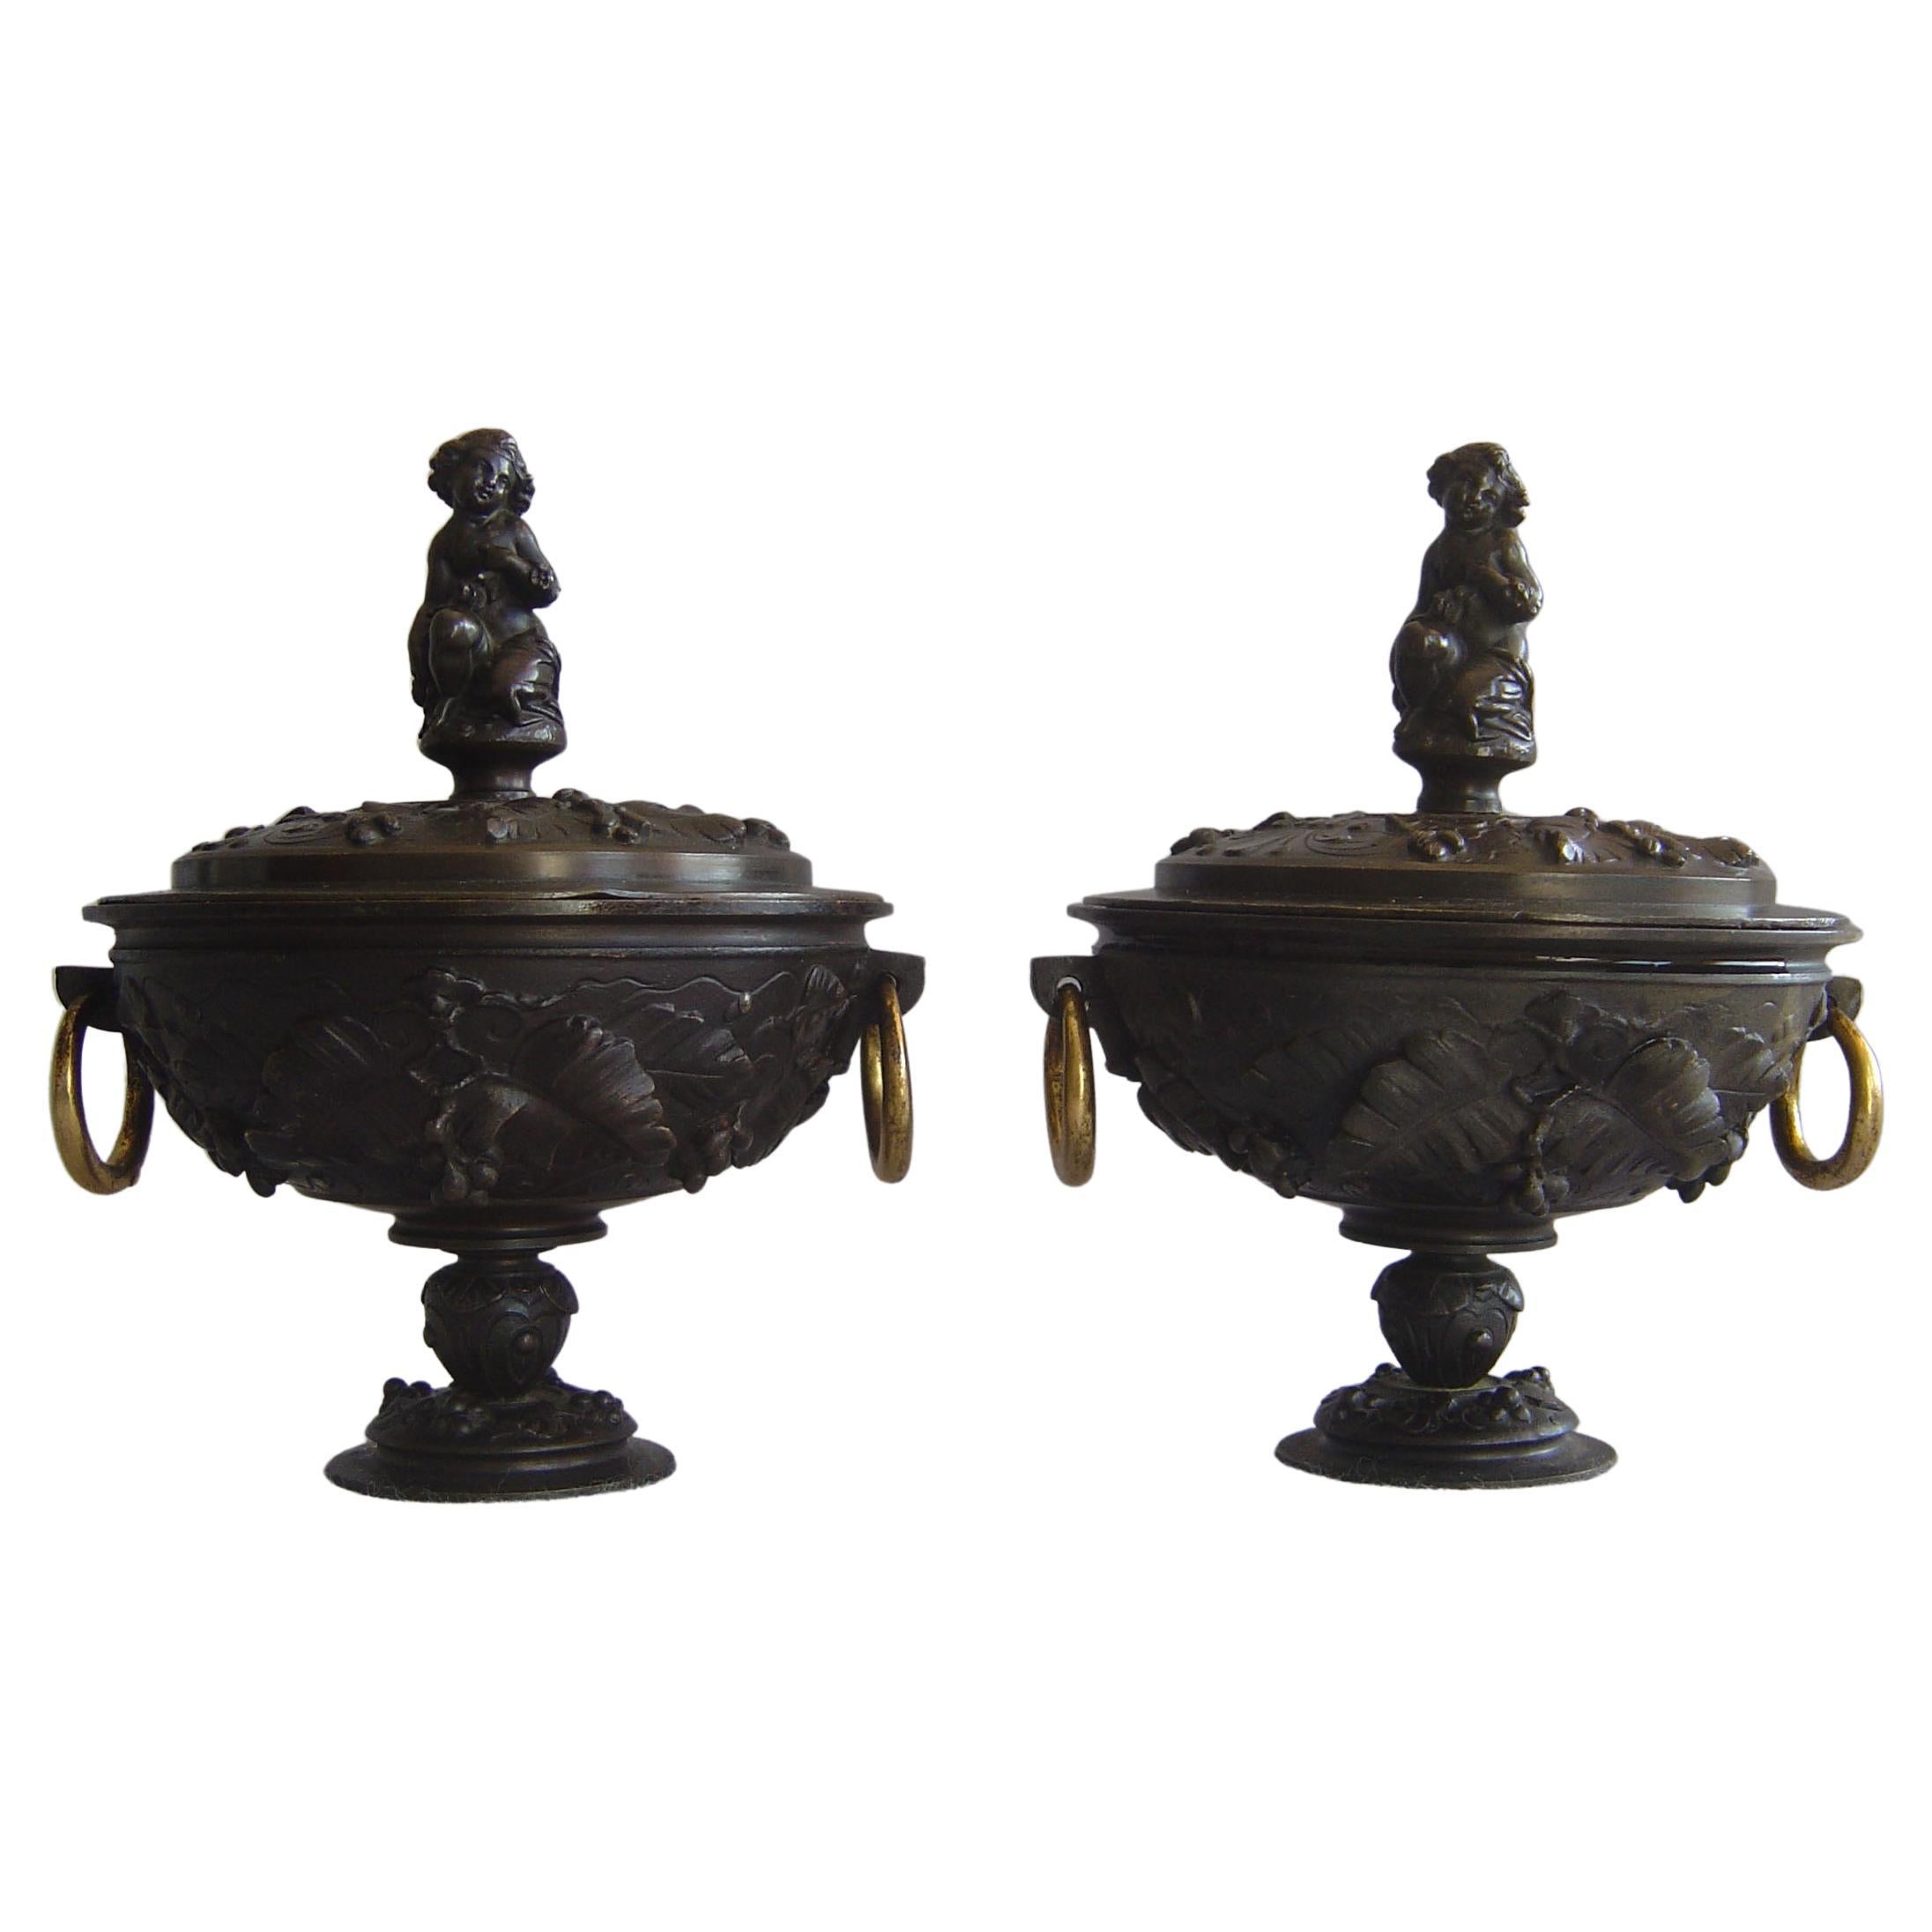 Pair of Antique French Patinated Bronze Lidded Urns